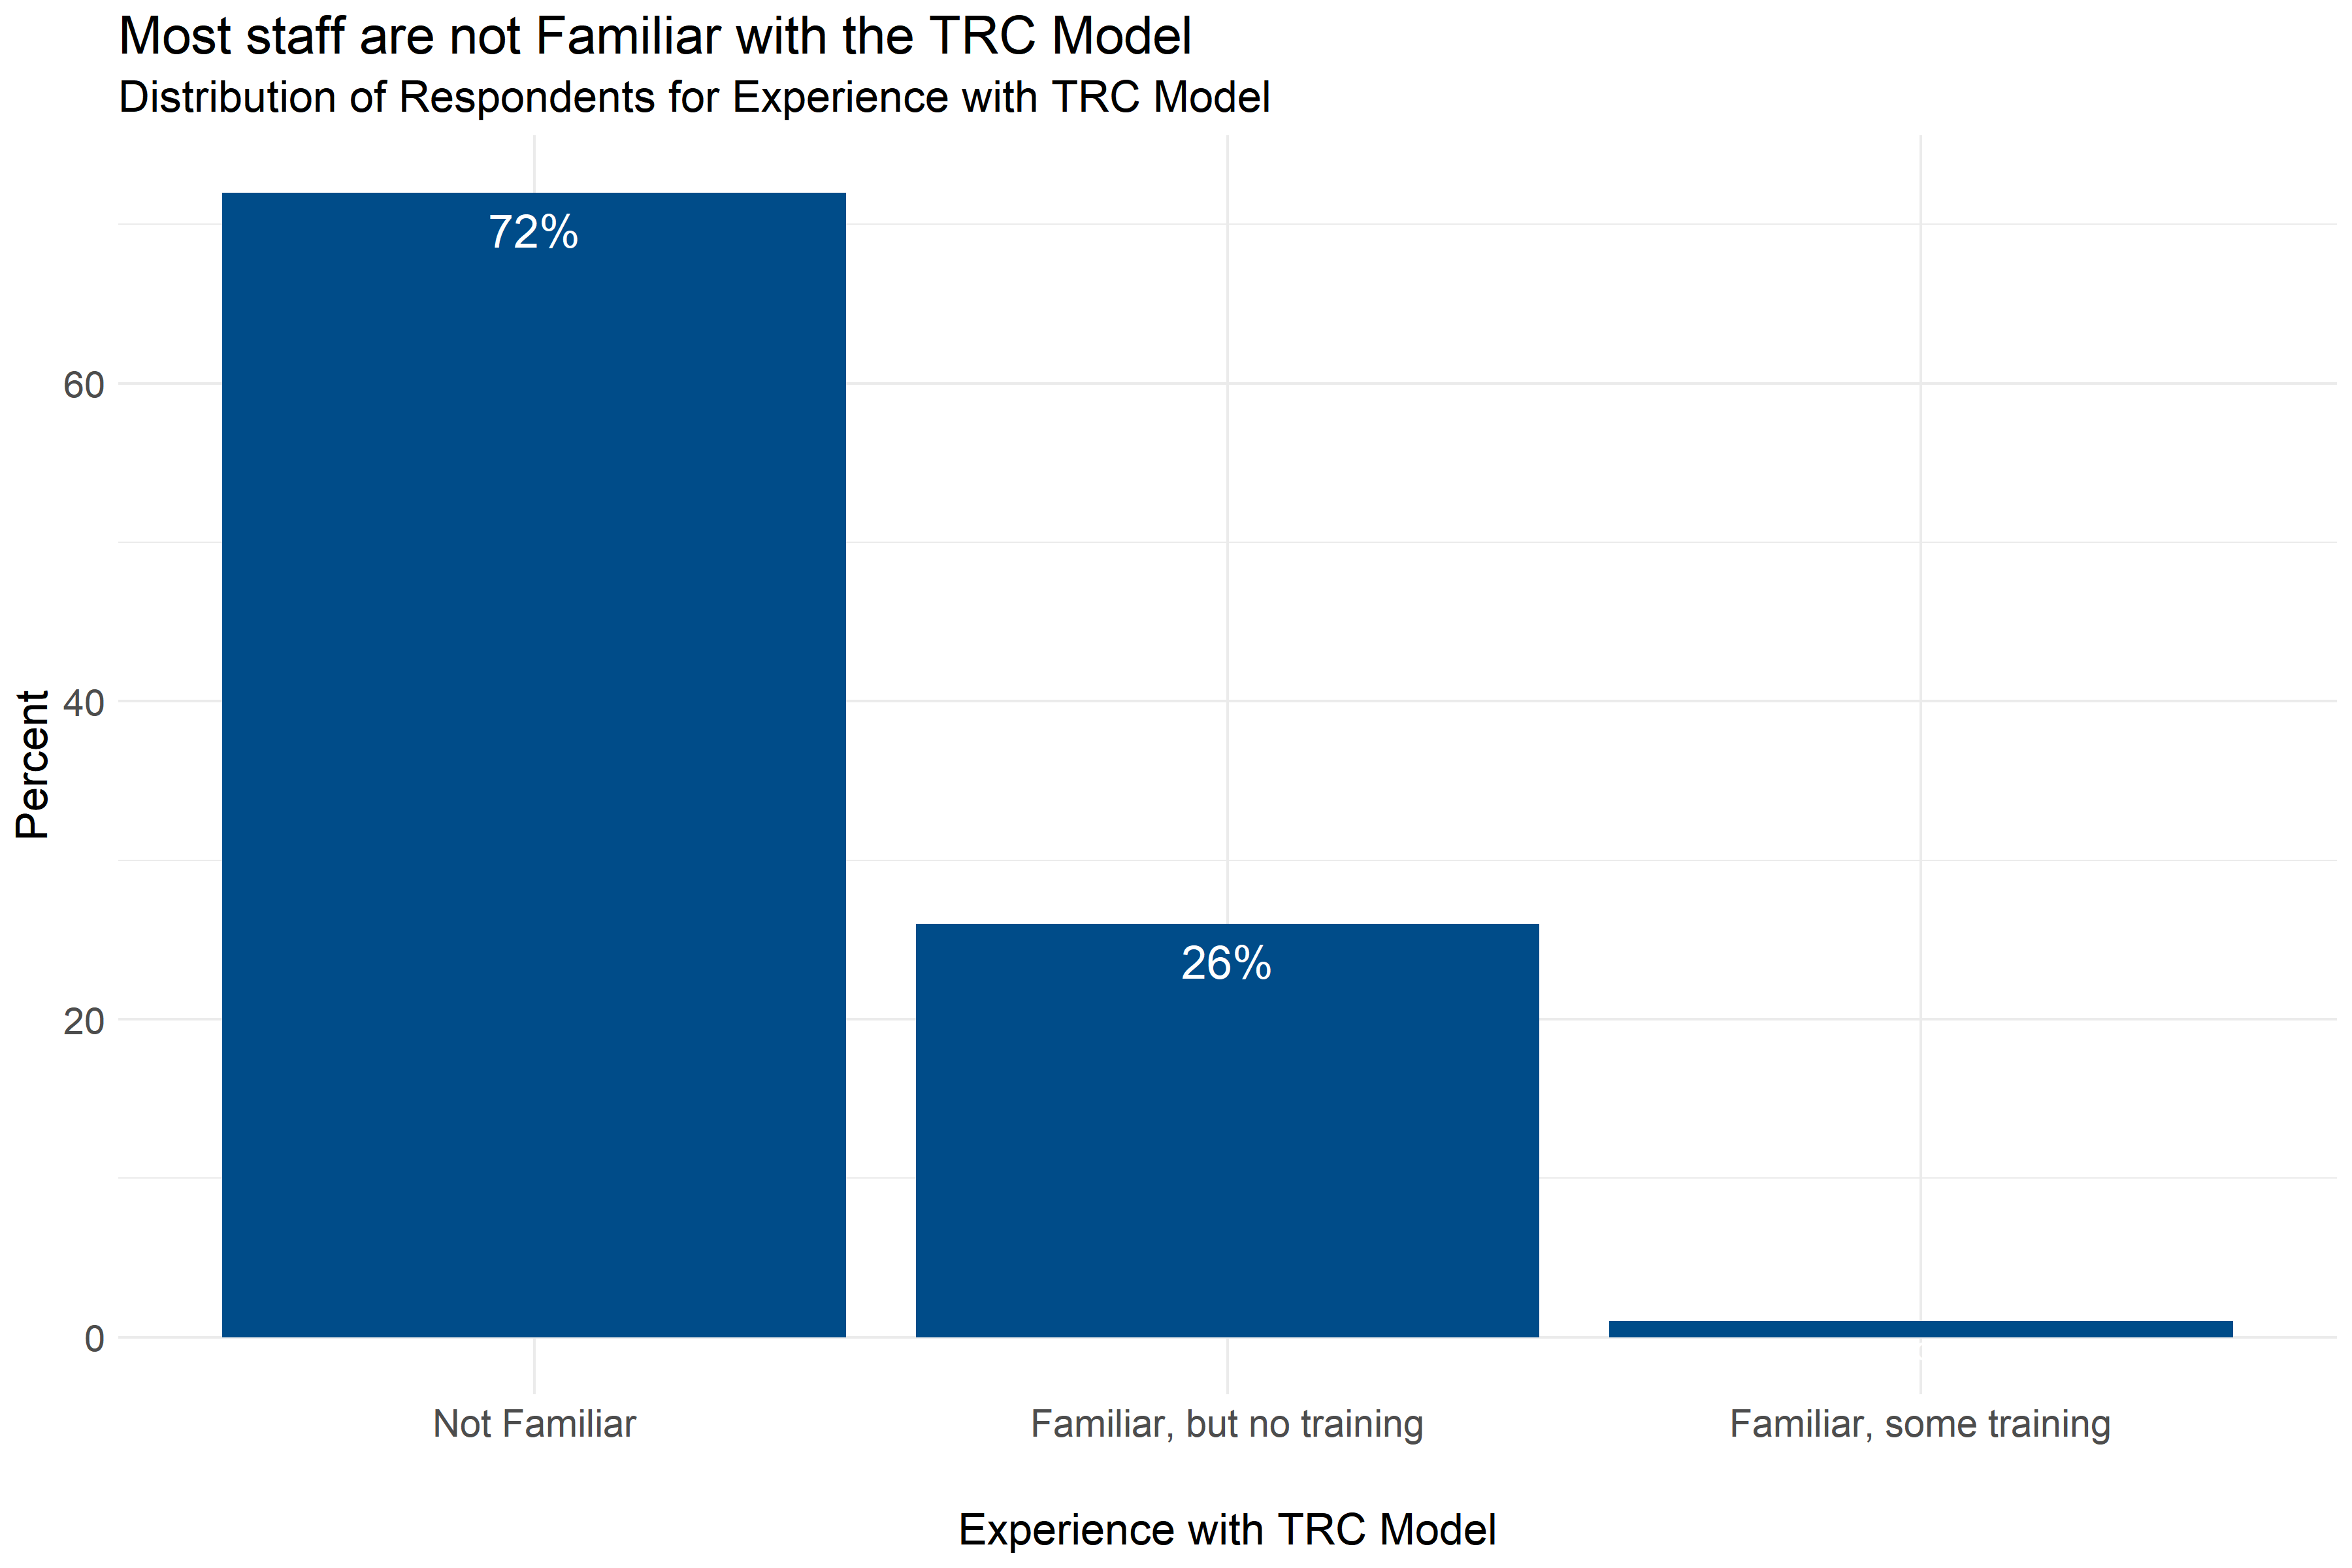 Distribution of responses about level of experience with the TRC Model